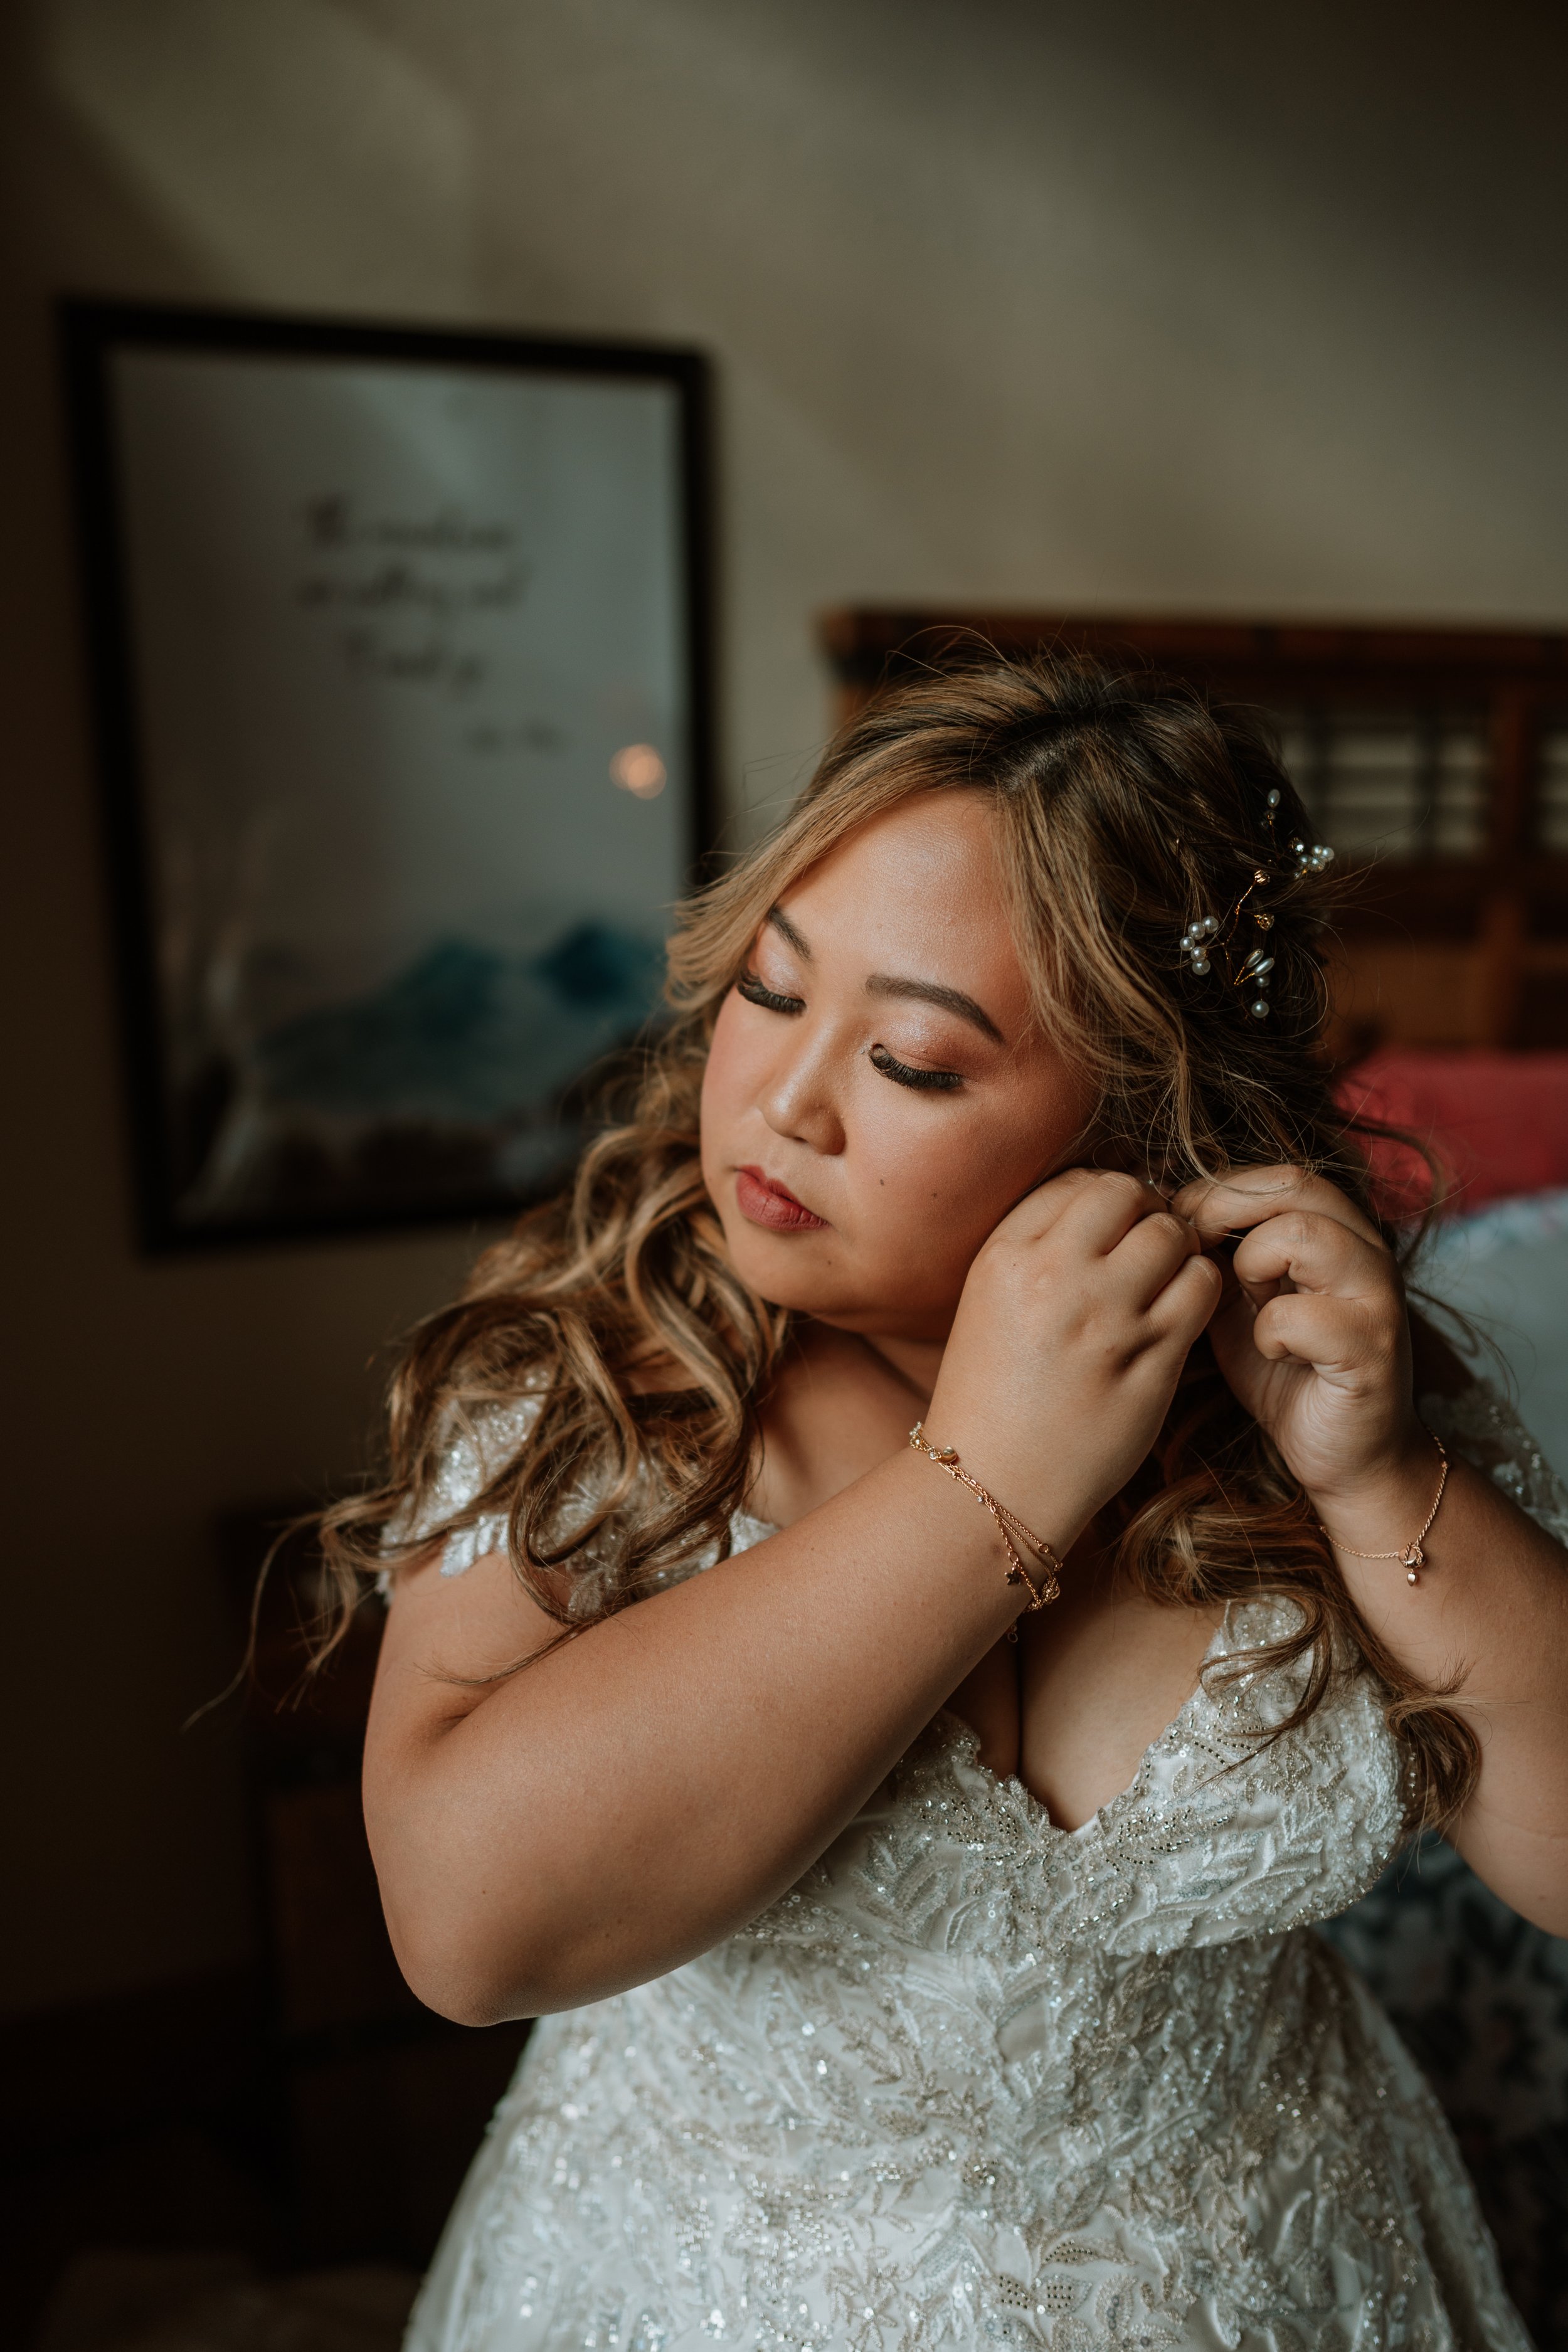  Clip in extensions were installed and a super curly half up with lots of braids. Makeup was centered around shimmer and contours.  Paige Weber Photography 